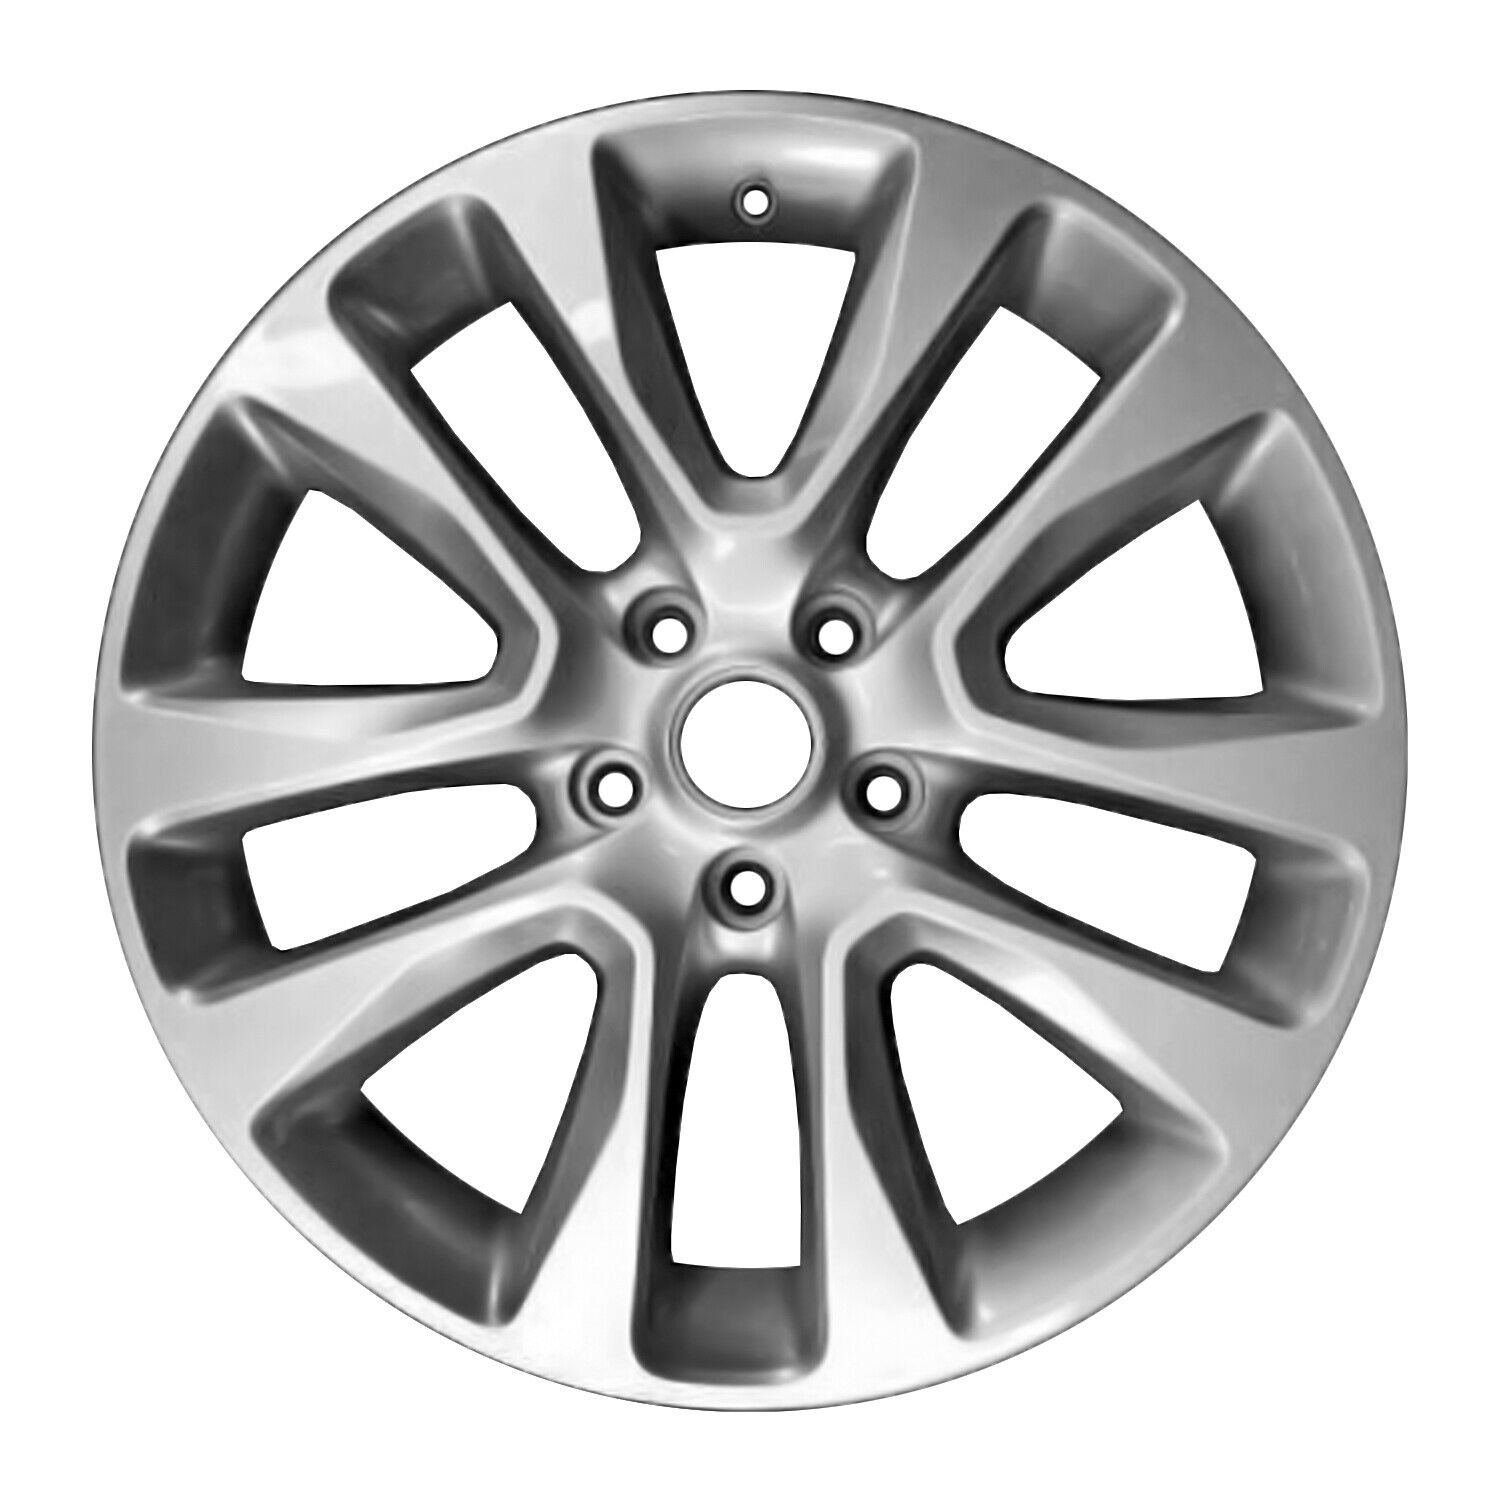 Reconditioned 20x8 Painted Light Silver Metallic Wheel fits 560-09168